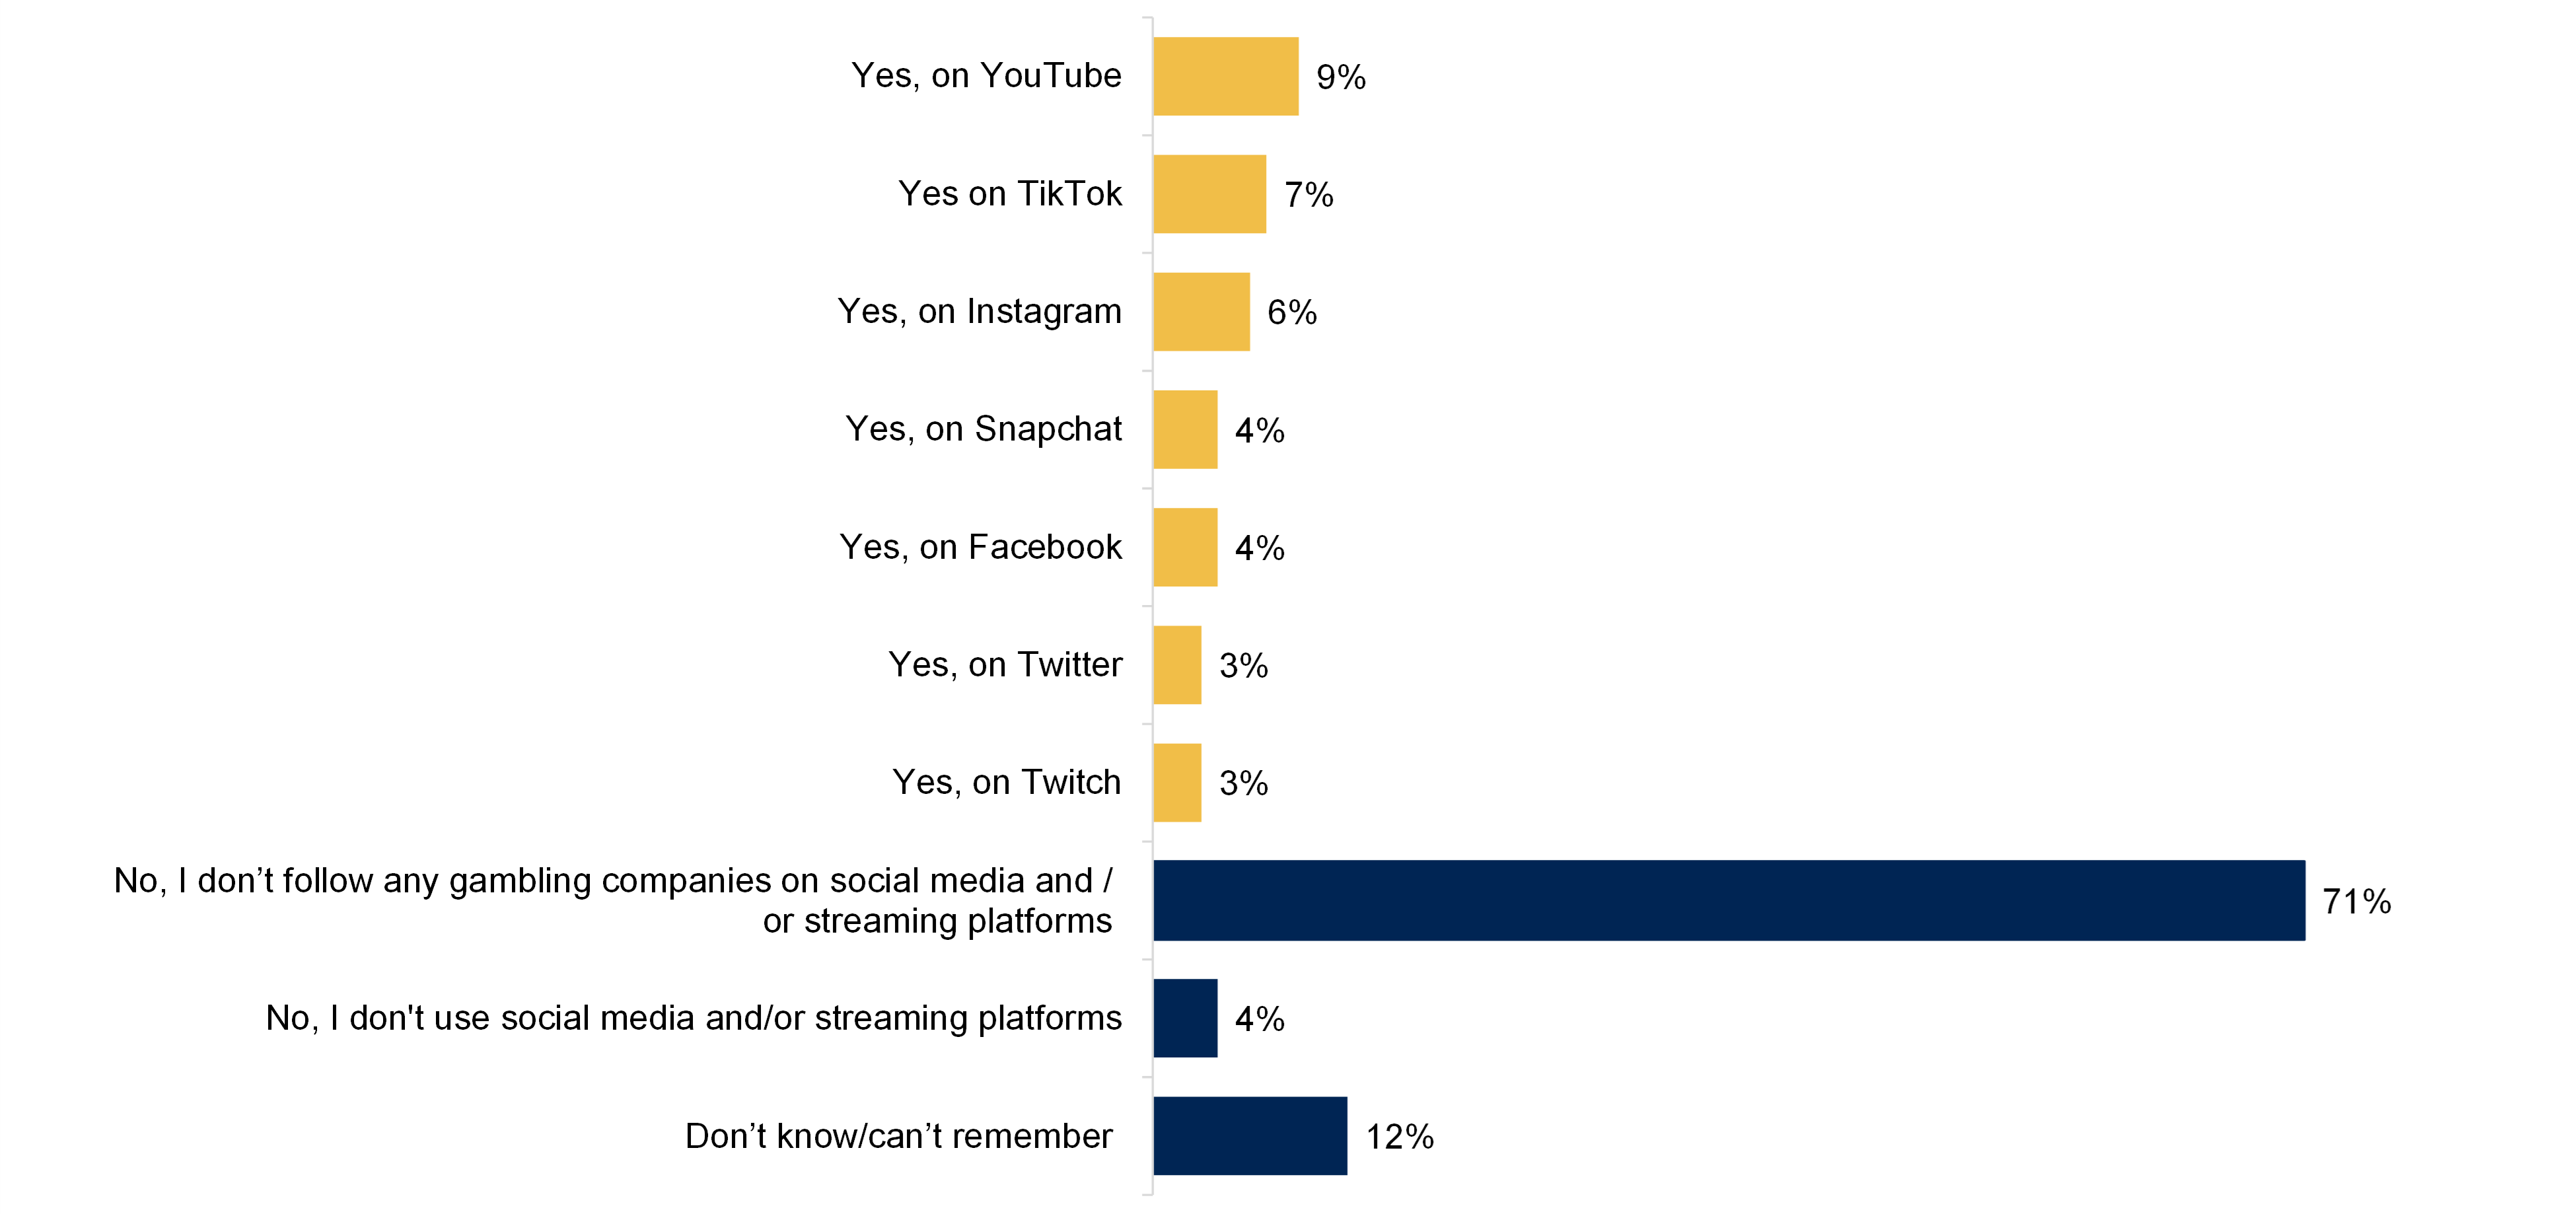 A bar chart showing exposure to gambling on social media, from 'No, I don't use social media and/or streaming platforms' to 'Yes, on YouTube', from the last 12 months. Data from the chart is provided within the following table.